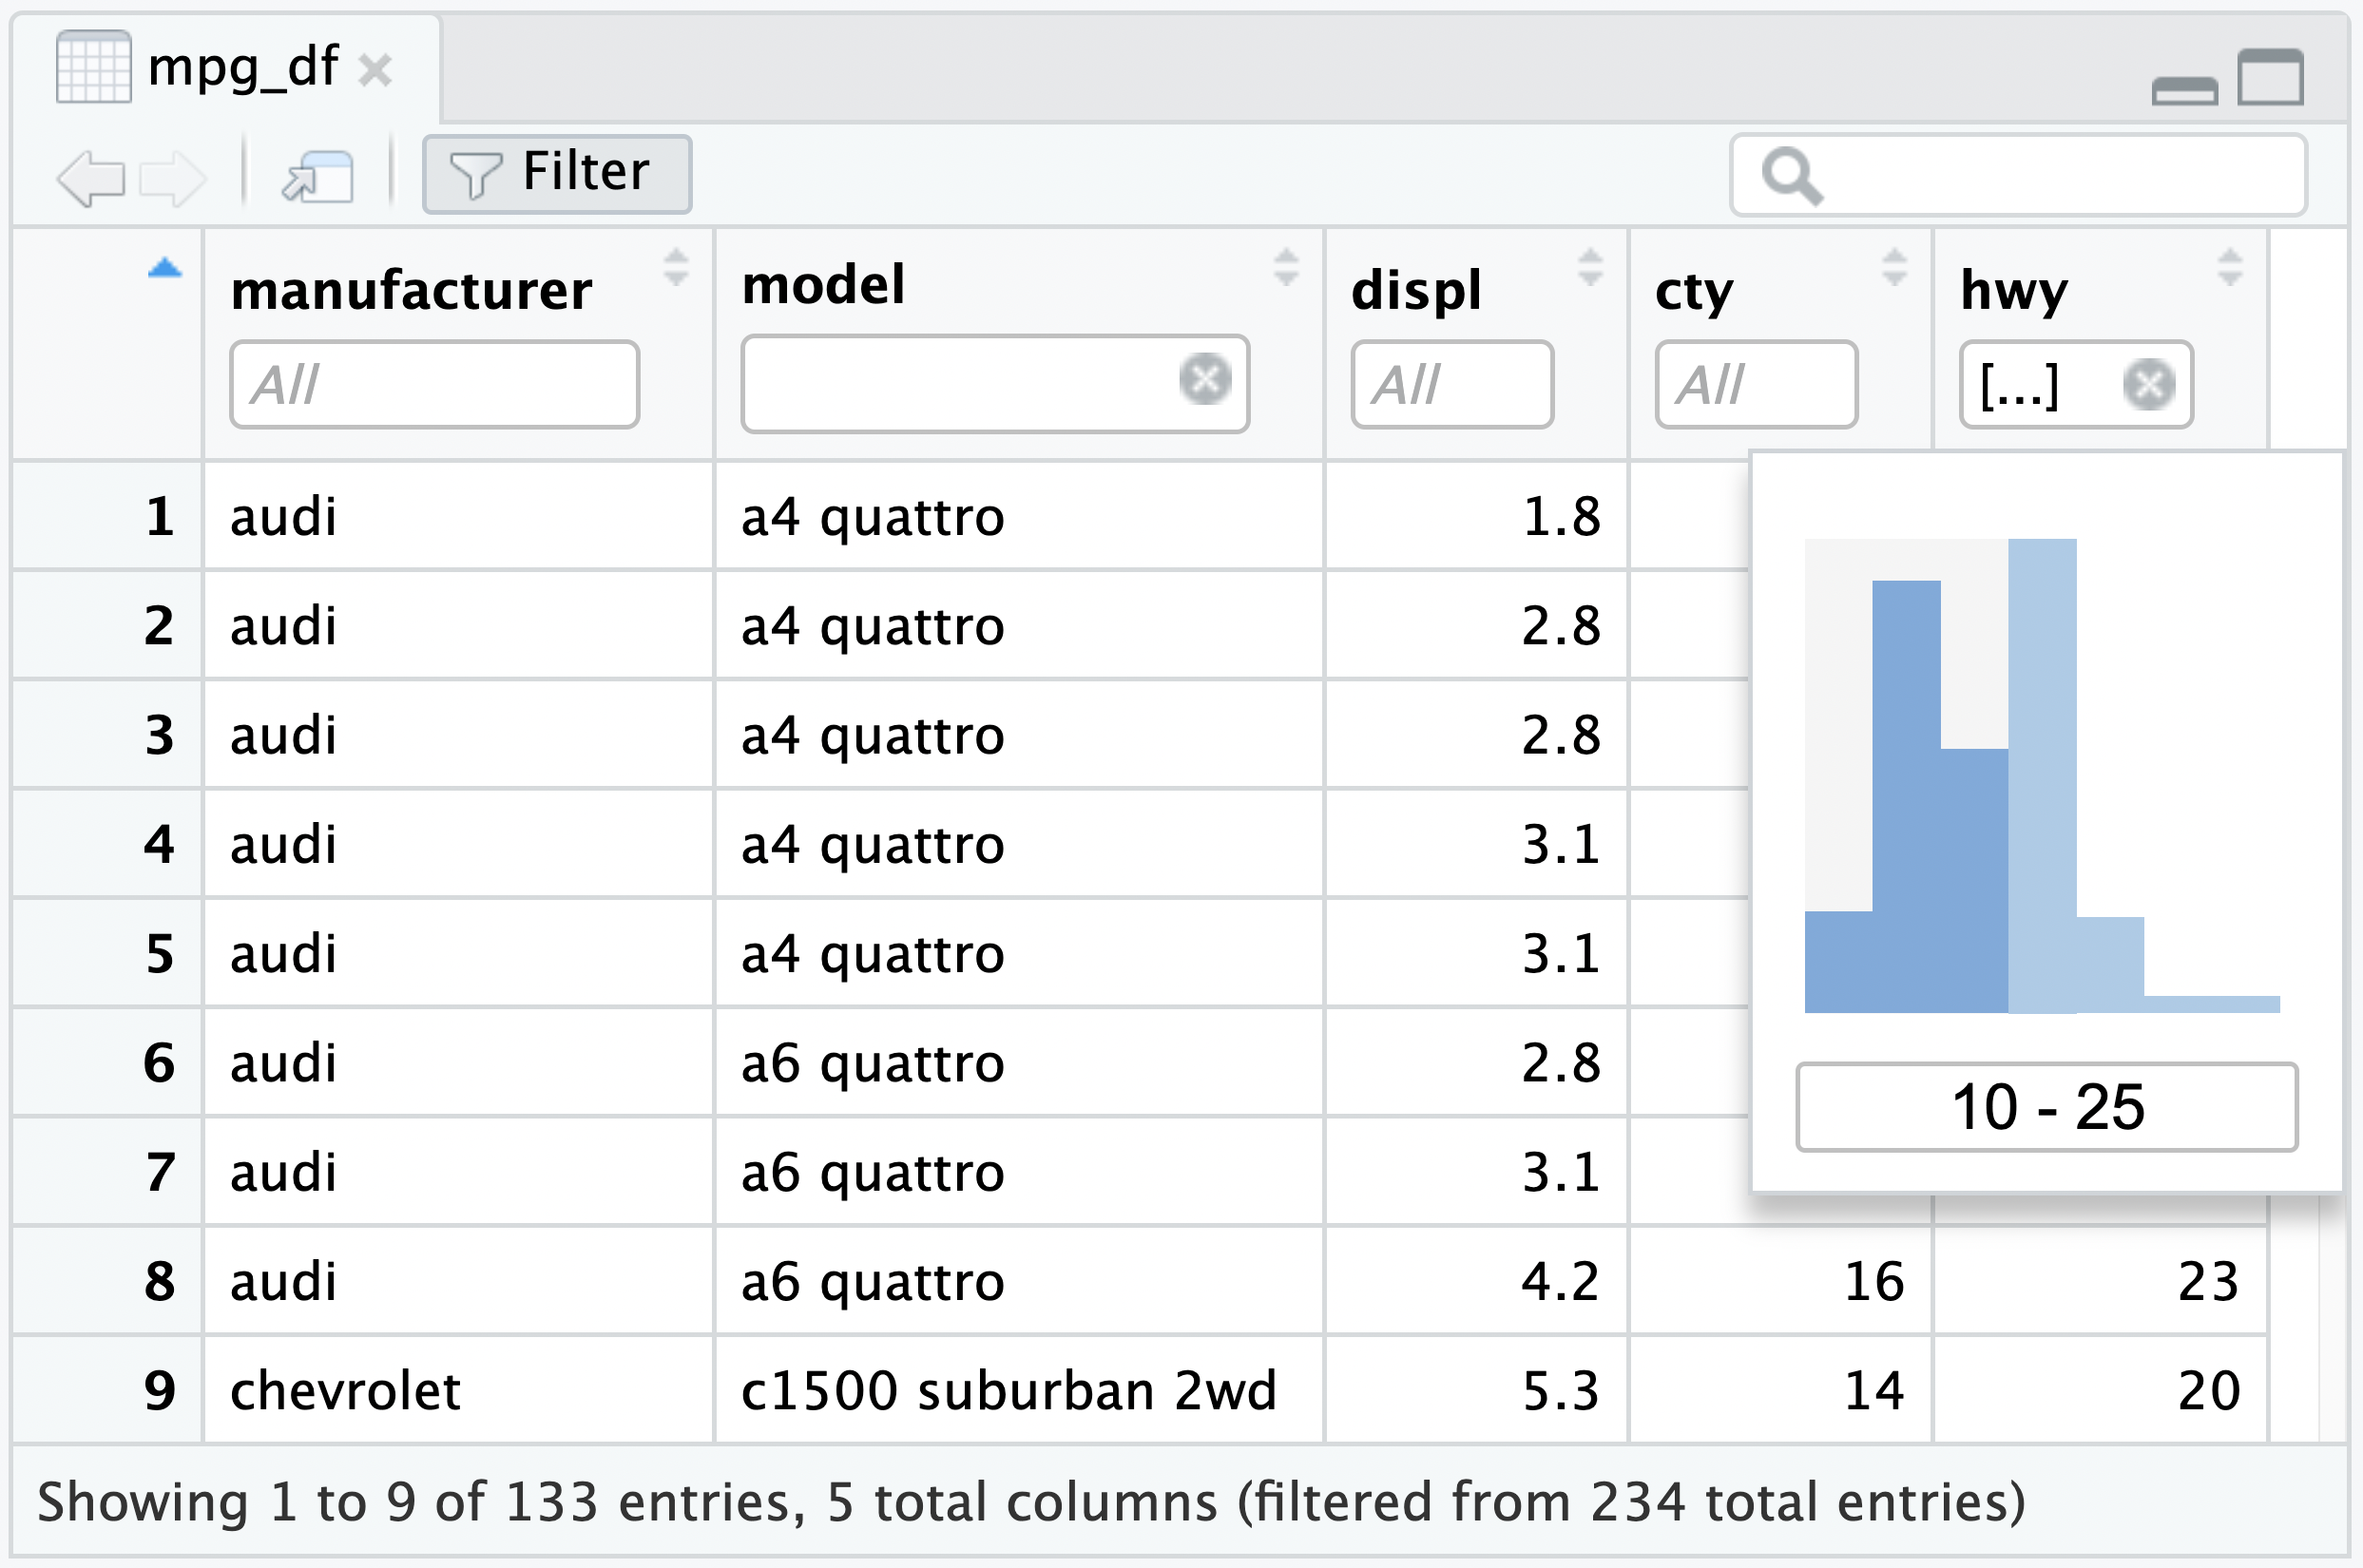 A datatable in the Data Viewer displaying 5 columns and 10 rows of the mpg_df dataset. The data is filtered to show values between 10 and 25 for hwy.